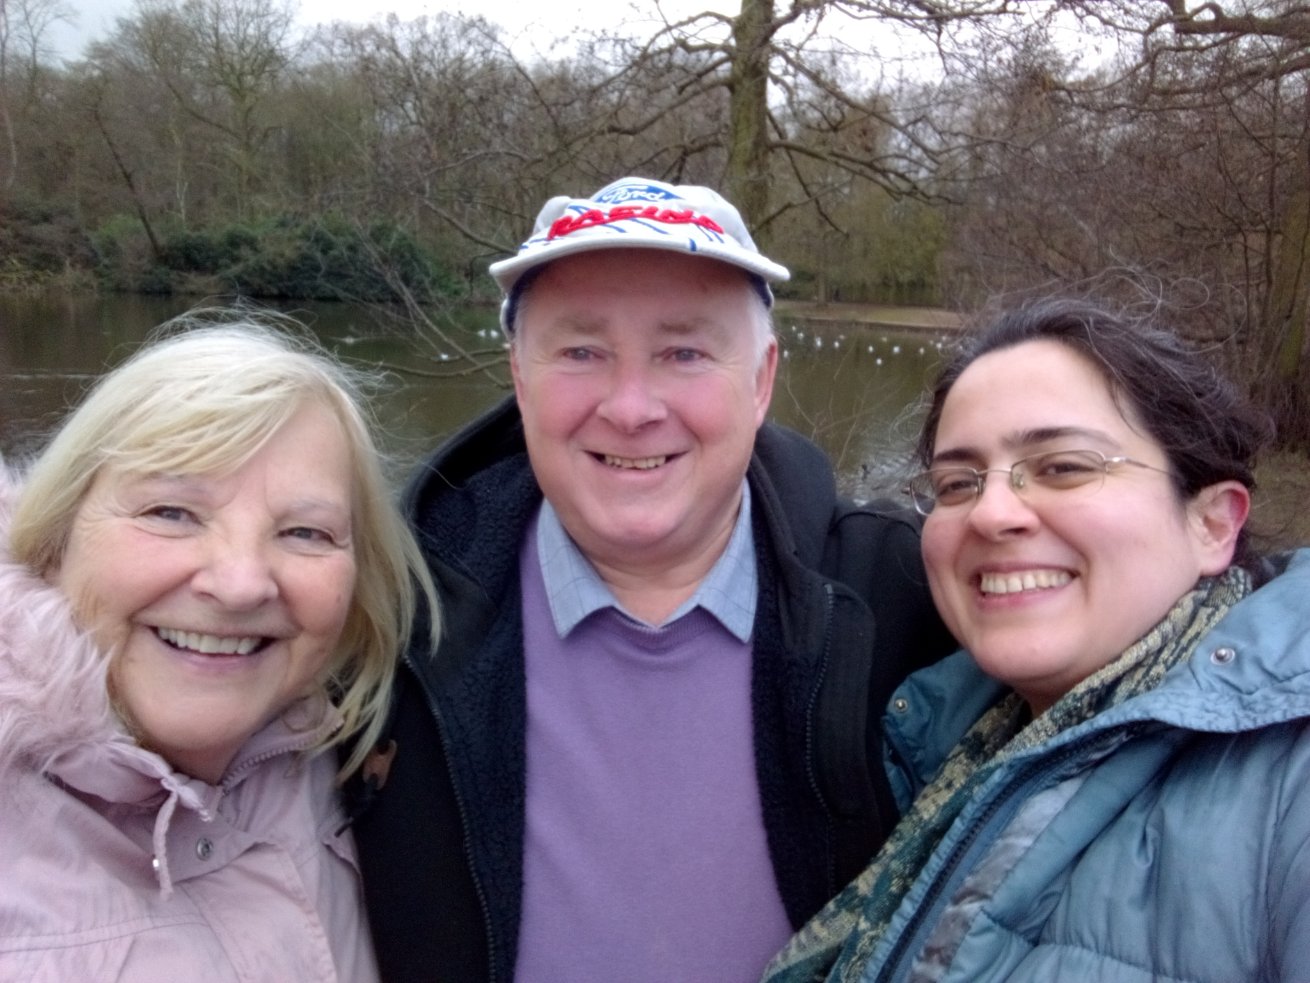 We had a walking group in Wollaton Nottingham before Coronavirus pandemic, Cynthia & Steve joined us March 3, 2020 